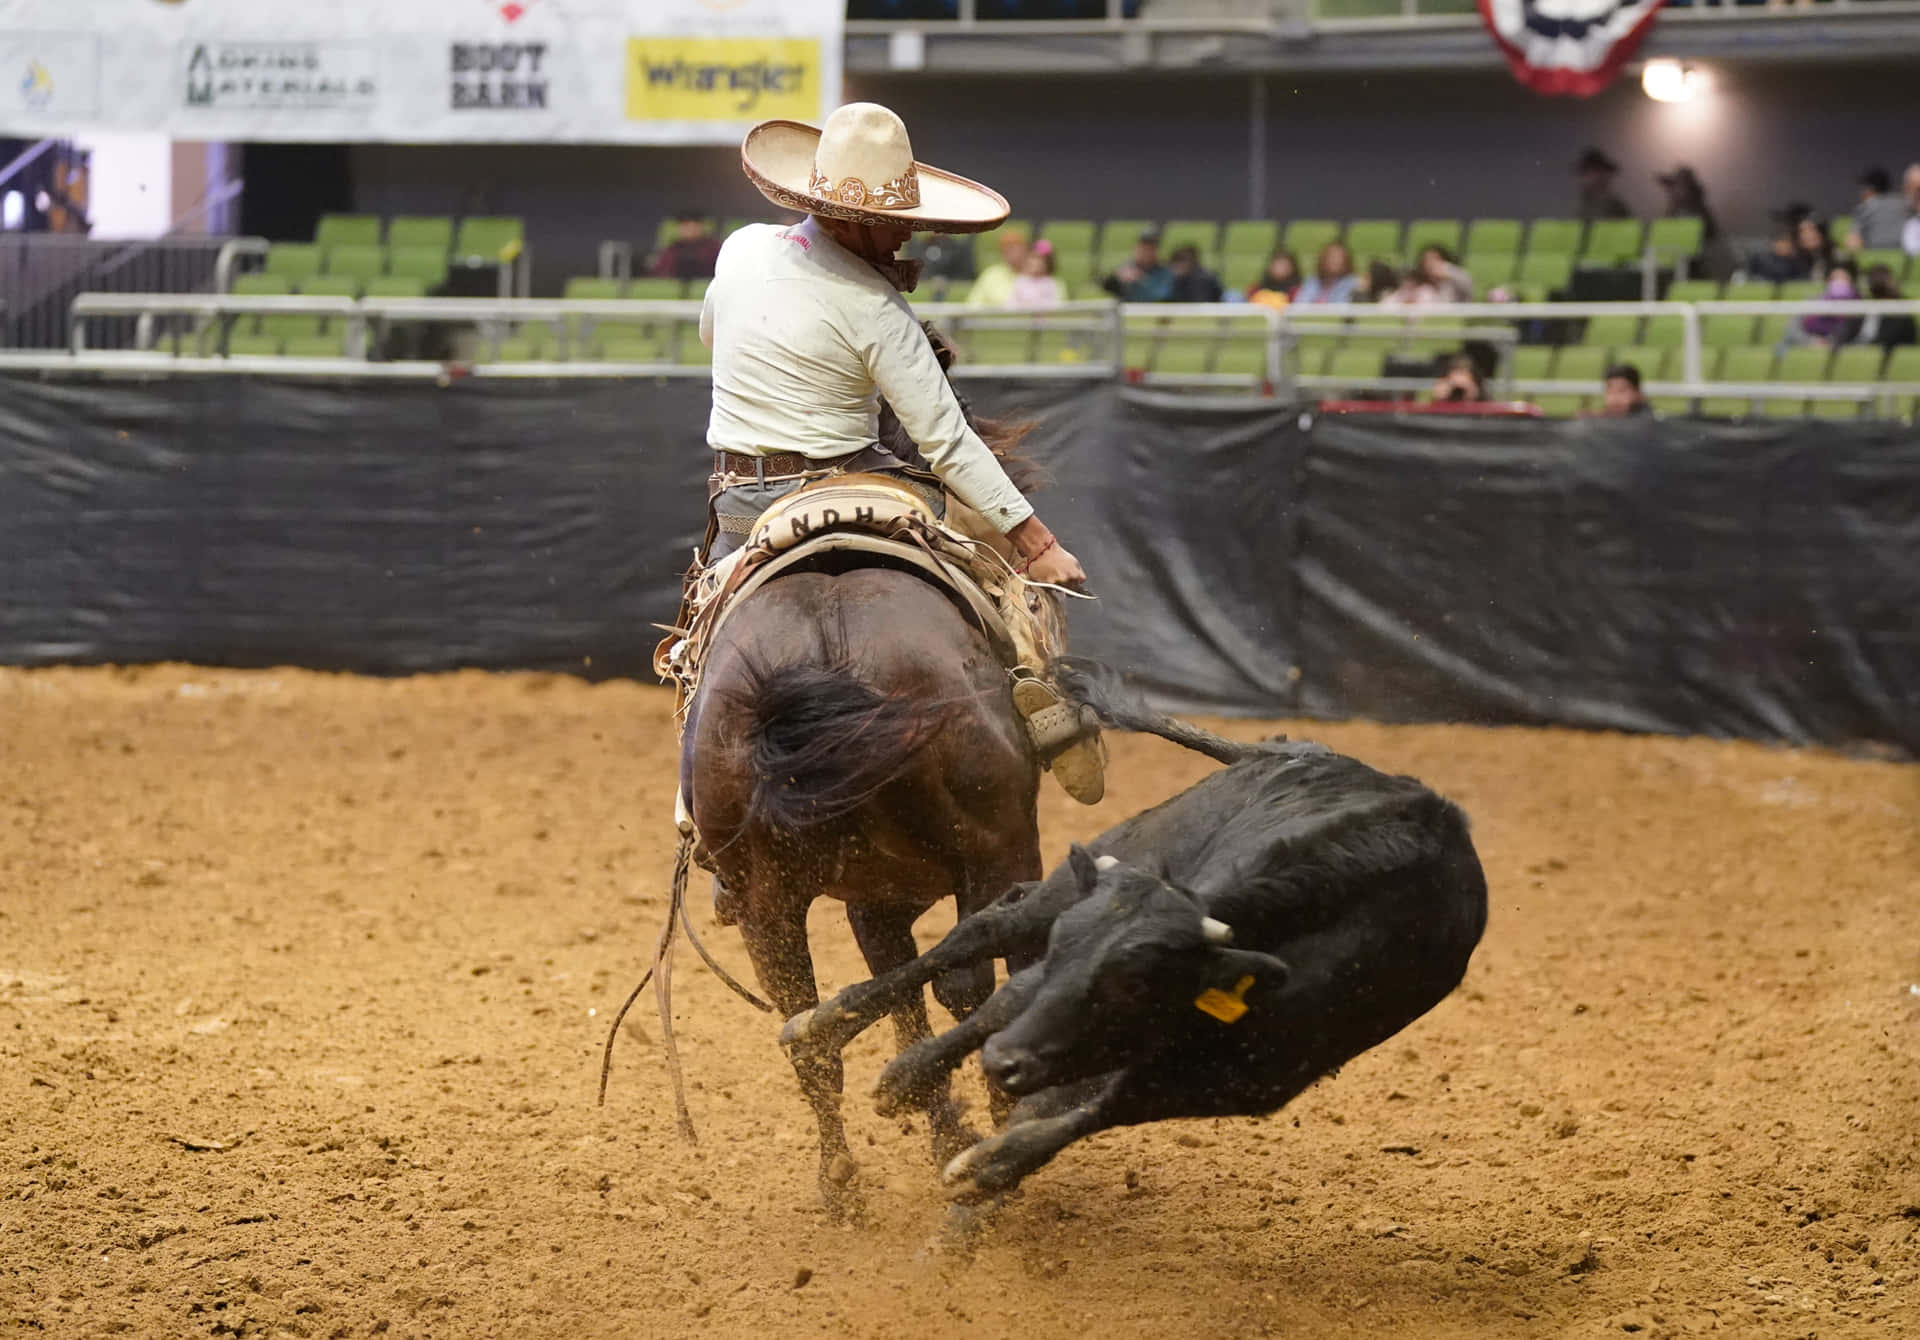 Professional Rodeo Riders Compete in Drilling Events